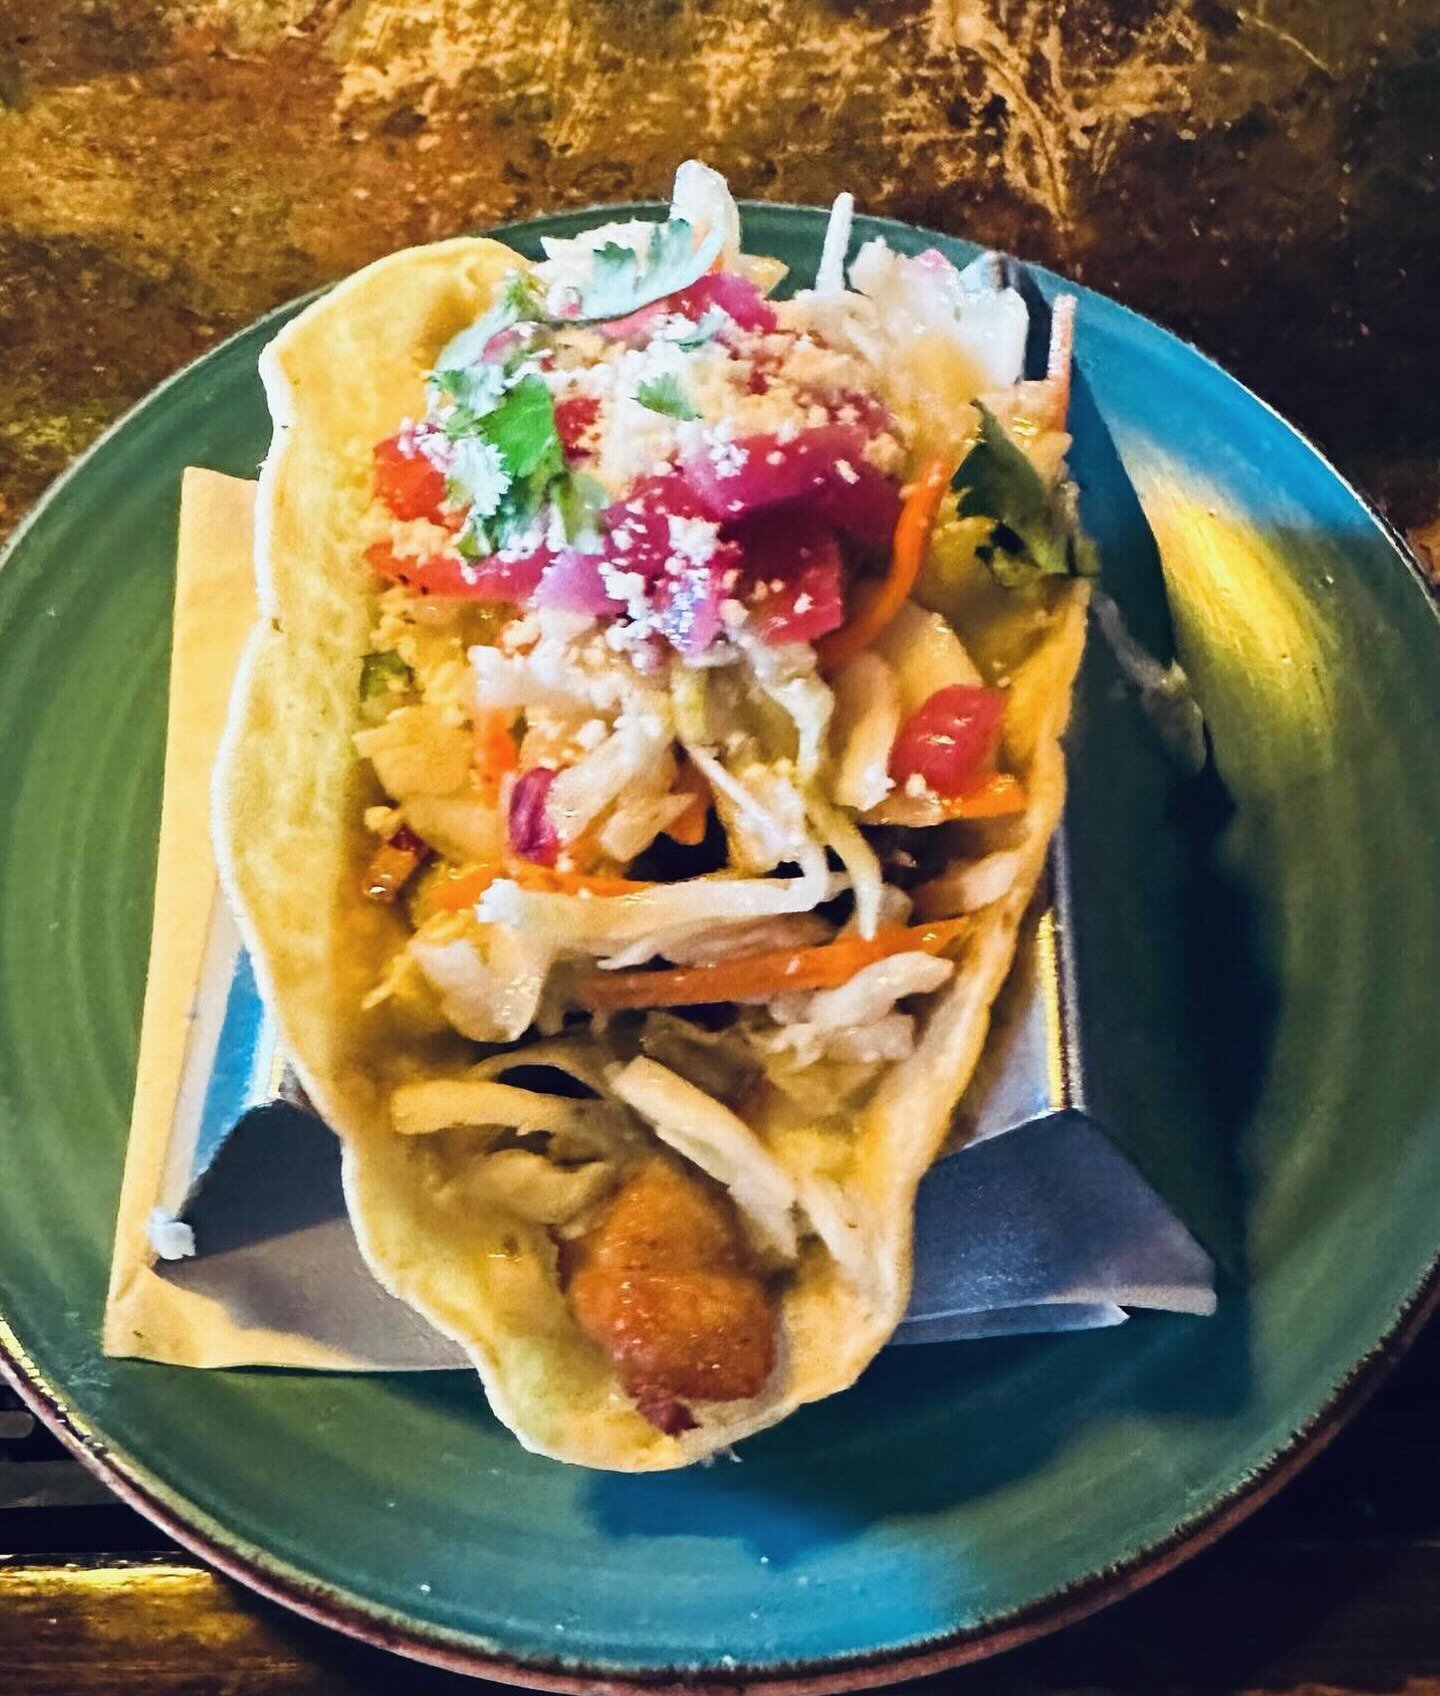 It&rsquo;s taco Tuesday! Featured the beer battered mahi taco